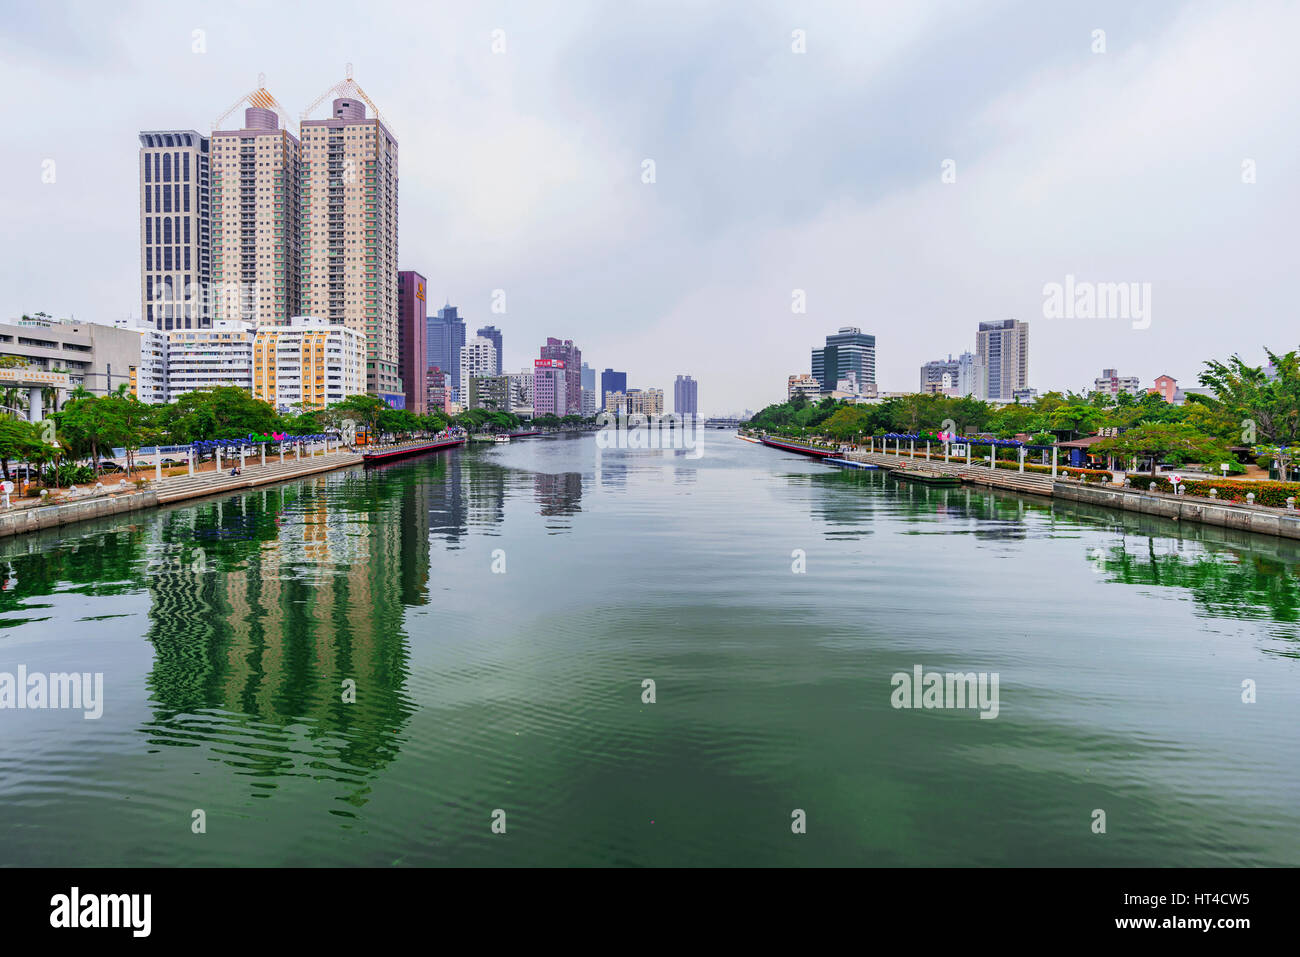 KAOHSIUNG, TAIWAN - NOVEMBER 26: This is a view of the love river with Kaohsiung financial district in the distance on November 26, 2016 in Kaohsiung Stock Photo